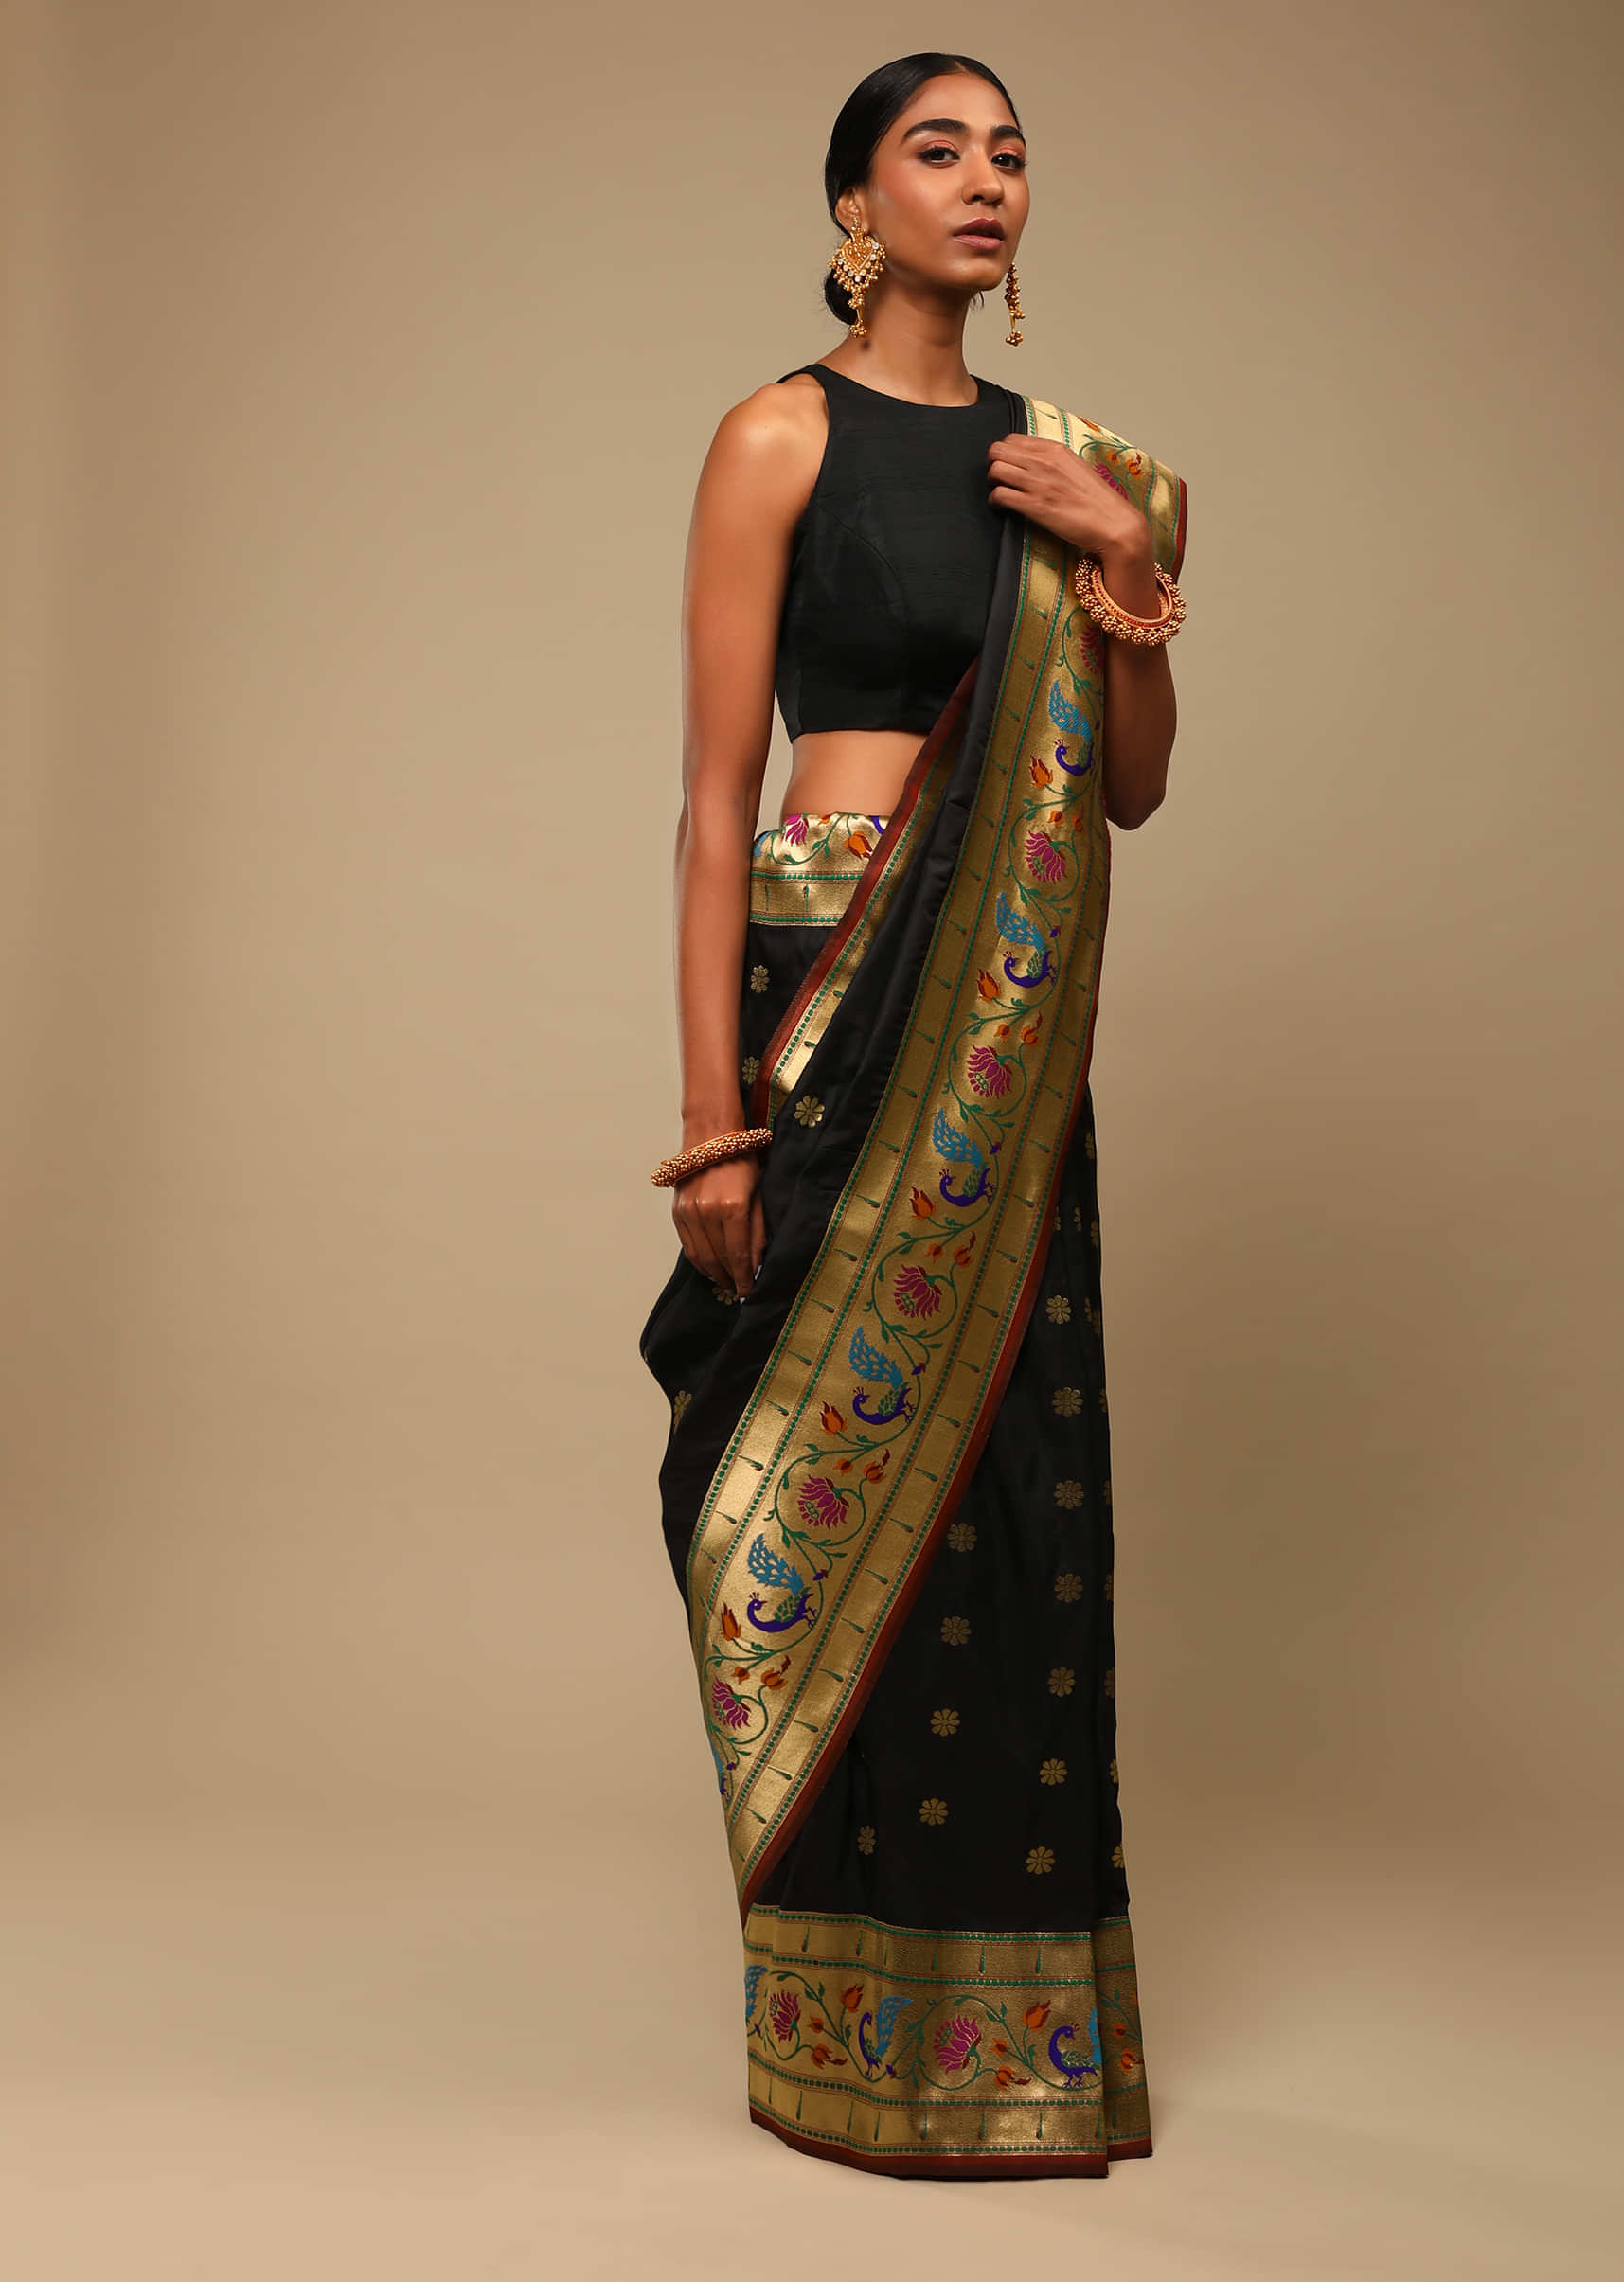 Black Saree In Art Handloom Silk With Woven Multi Colored Peacock Motifs On The Border, Floral Buttis And Unstitched Blouse  